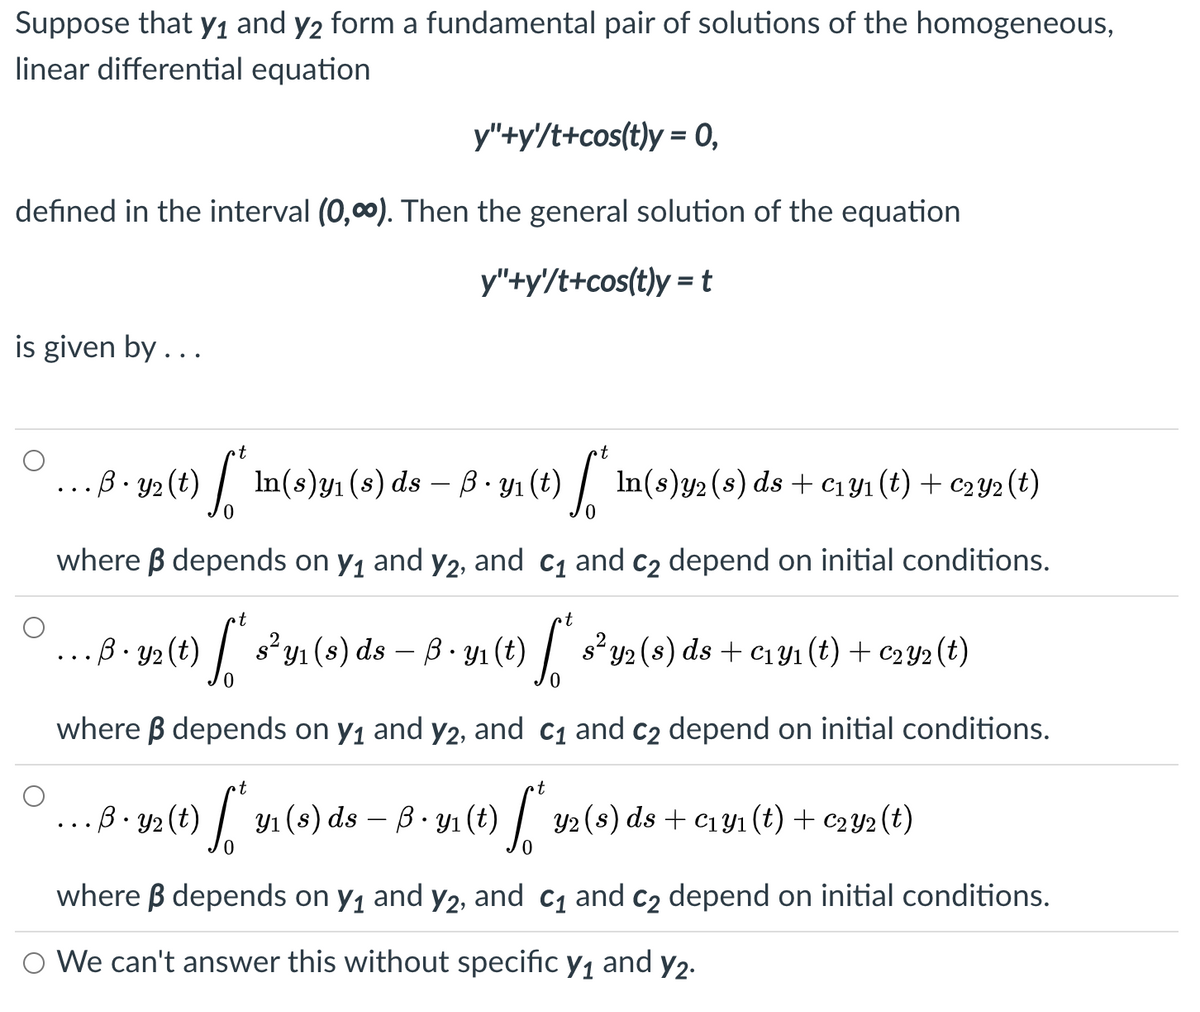 Suppose that Y1 and y2 form a fundamental pair of solutions of the homogeneous,
linear differential equation
y"+y'/t+cos(t)y = 0,
defined in the interval (0,0). Then the general solution of the equation
y"+y'/t+cos(t)y = t
is given by...
t
B - y2 (t) .
In(s)y1 (s) ds – ß · y1 (t) | In(s)y2 (s) ds + c1Y1 (t) + c2Y2 (t)
-
where B depends on y, and y2, and c1 and C2 depend on initial conditions.
t
...B. y2 (t)
s y1 (s) ds – B. Y1 (t) | s² y2(s) ds + c1y1 (t) + C2Y2 (t)
where B depends on y1 and y2, and c1 and C2 depend on initial conditions.
- B • y2 (t) |.
Y1 (s) ds – B- yı (t) / Y2(s) ds + c1yı (t) + c2Y2 (t)
where B depends on y, and y2, and c1 and c2 depend on initial conditions.
O We can't answer this without specific y1 and y2.
